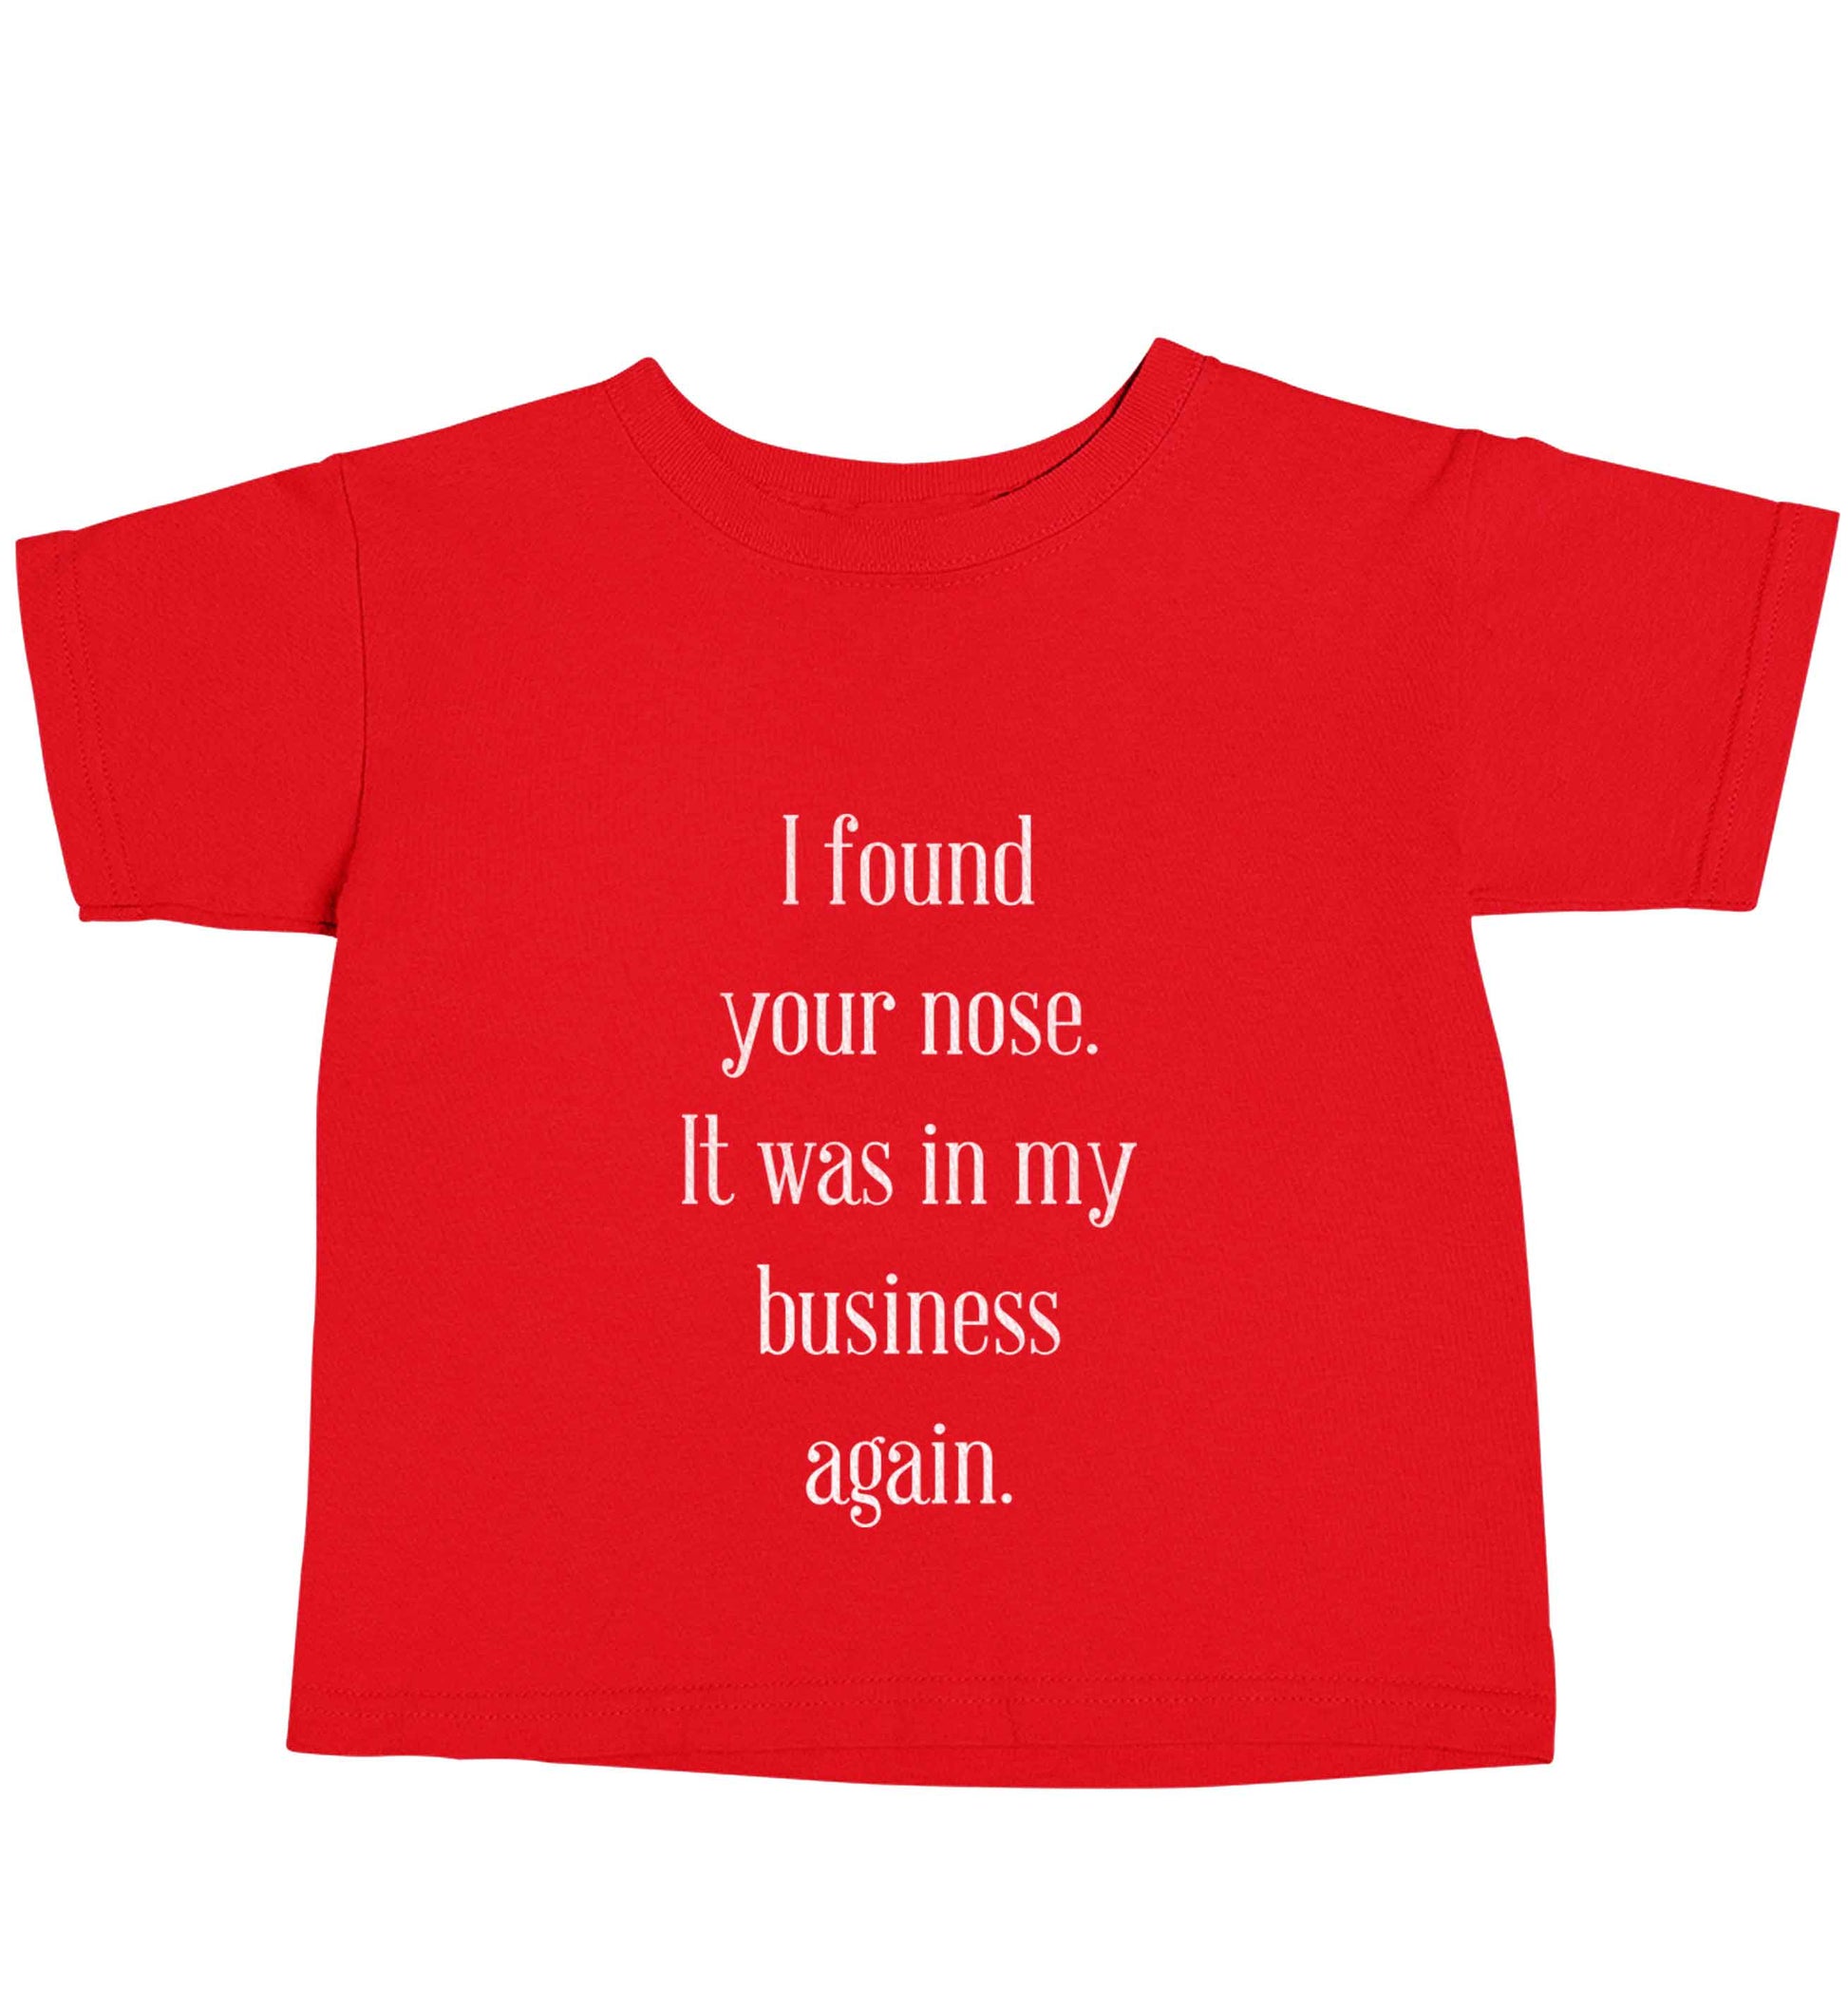 I found your nose it was in my business again red baby toddler Tshirt 2 Years